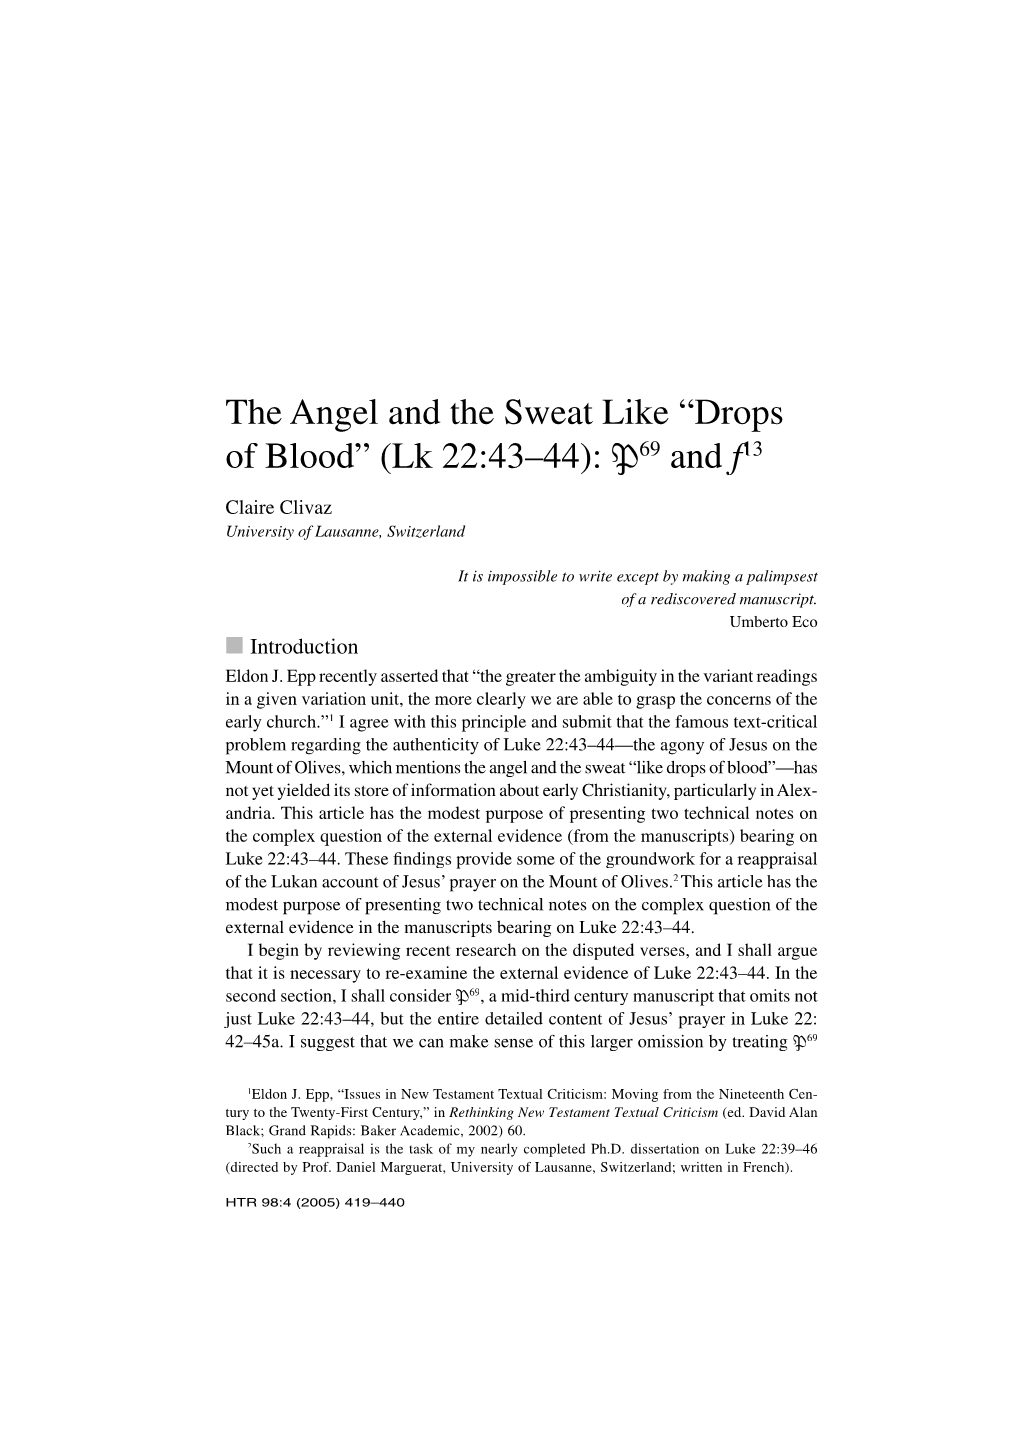 The Angel and the Sweat Like “Drops of Blood” (Lk 22:43–44): ∏69 and F13